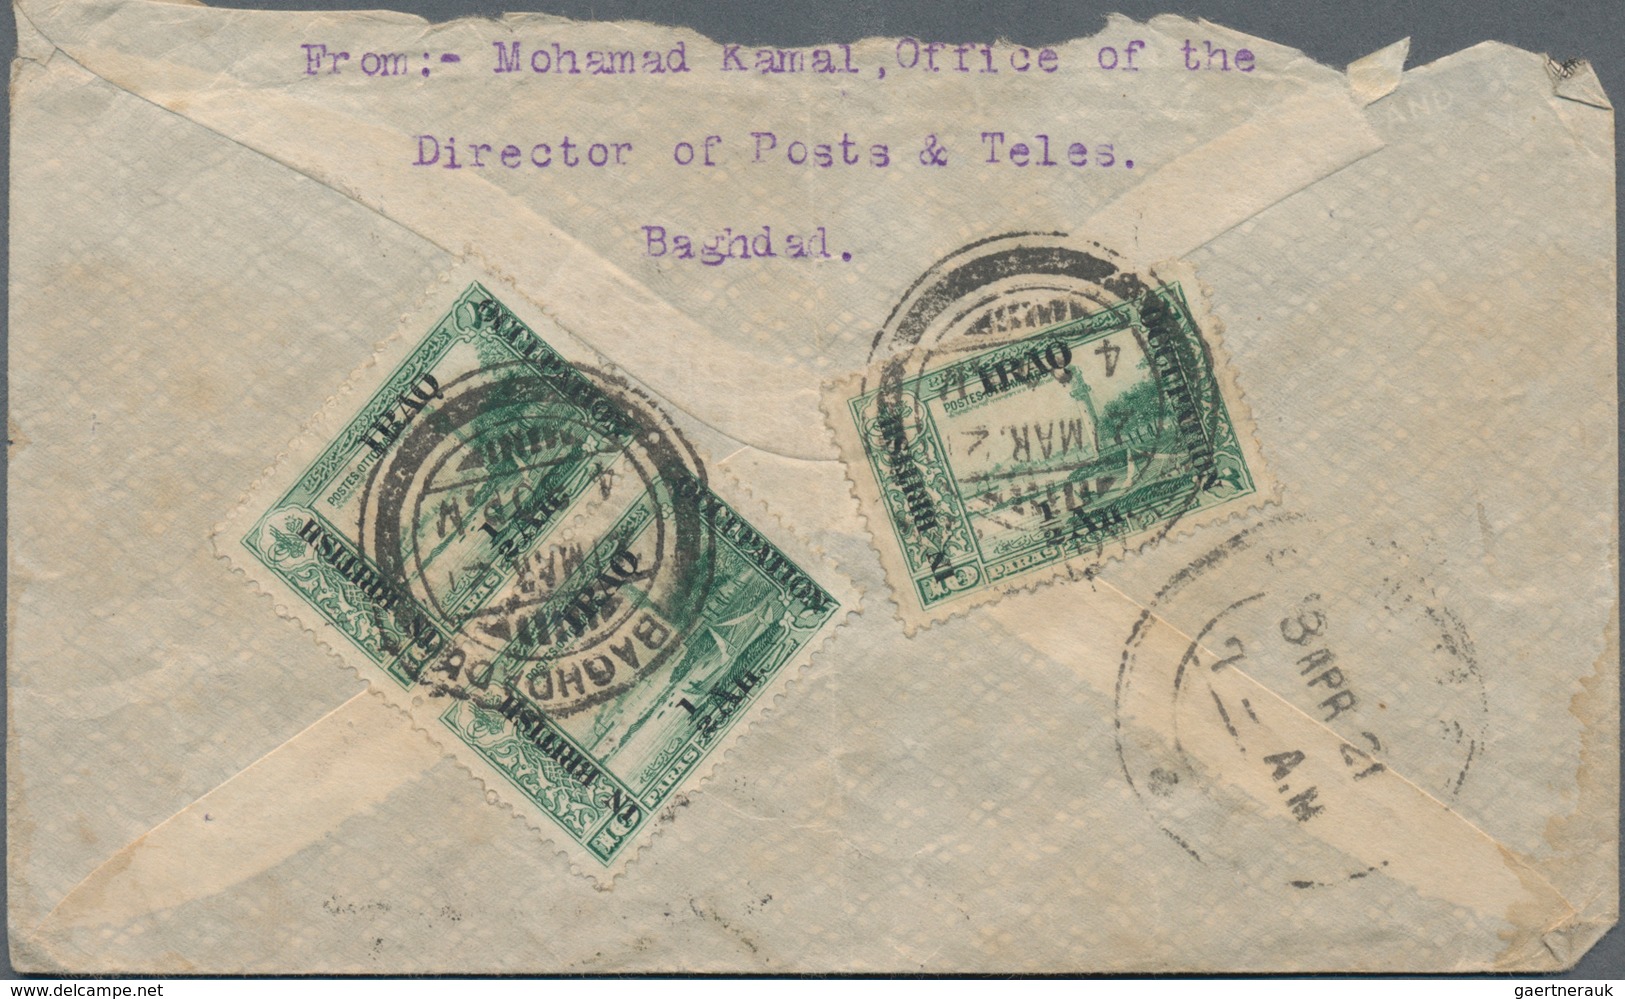 Irak: 1917/80 (ca.), cover lot inc. occupation (4 inc. from "office of the Director of Posts & Teles